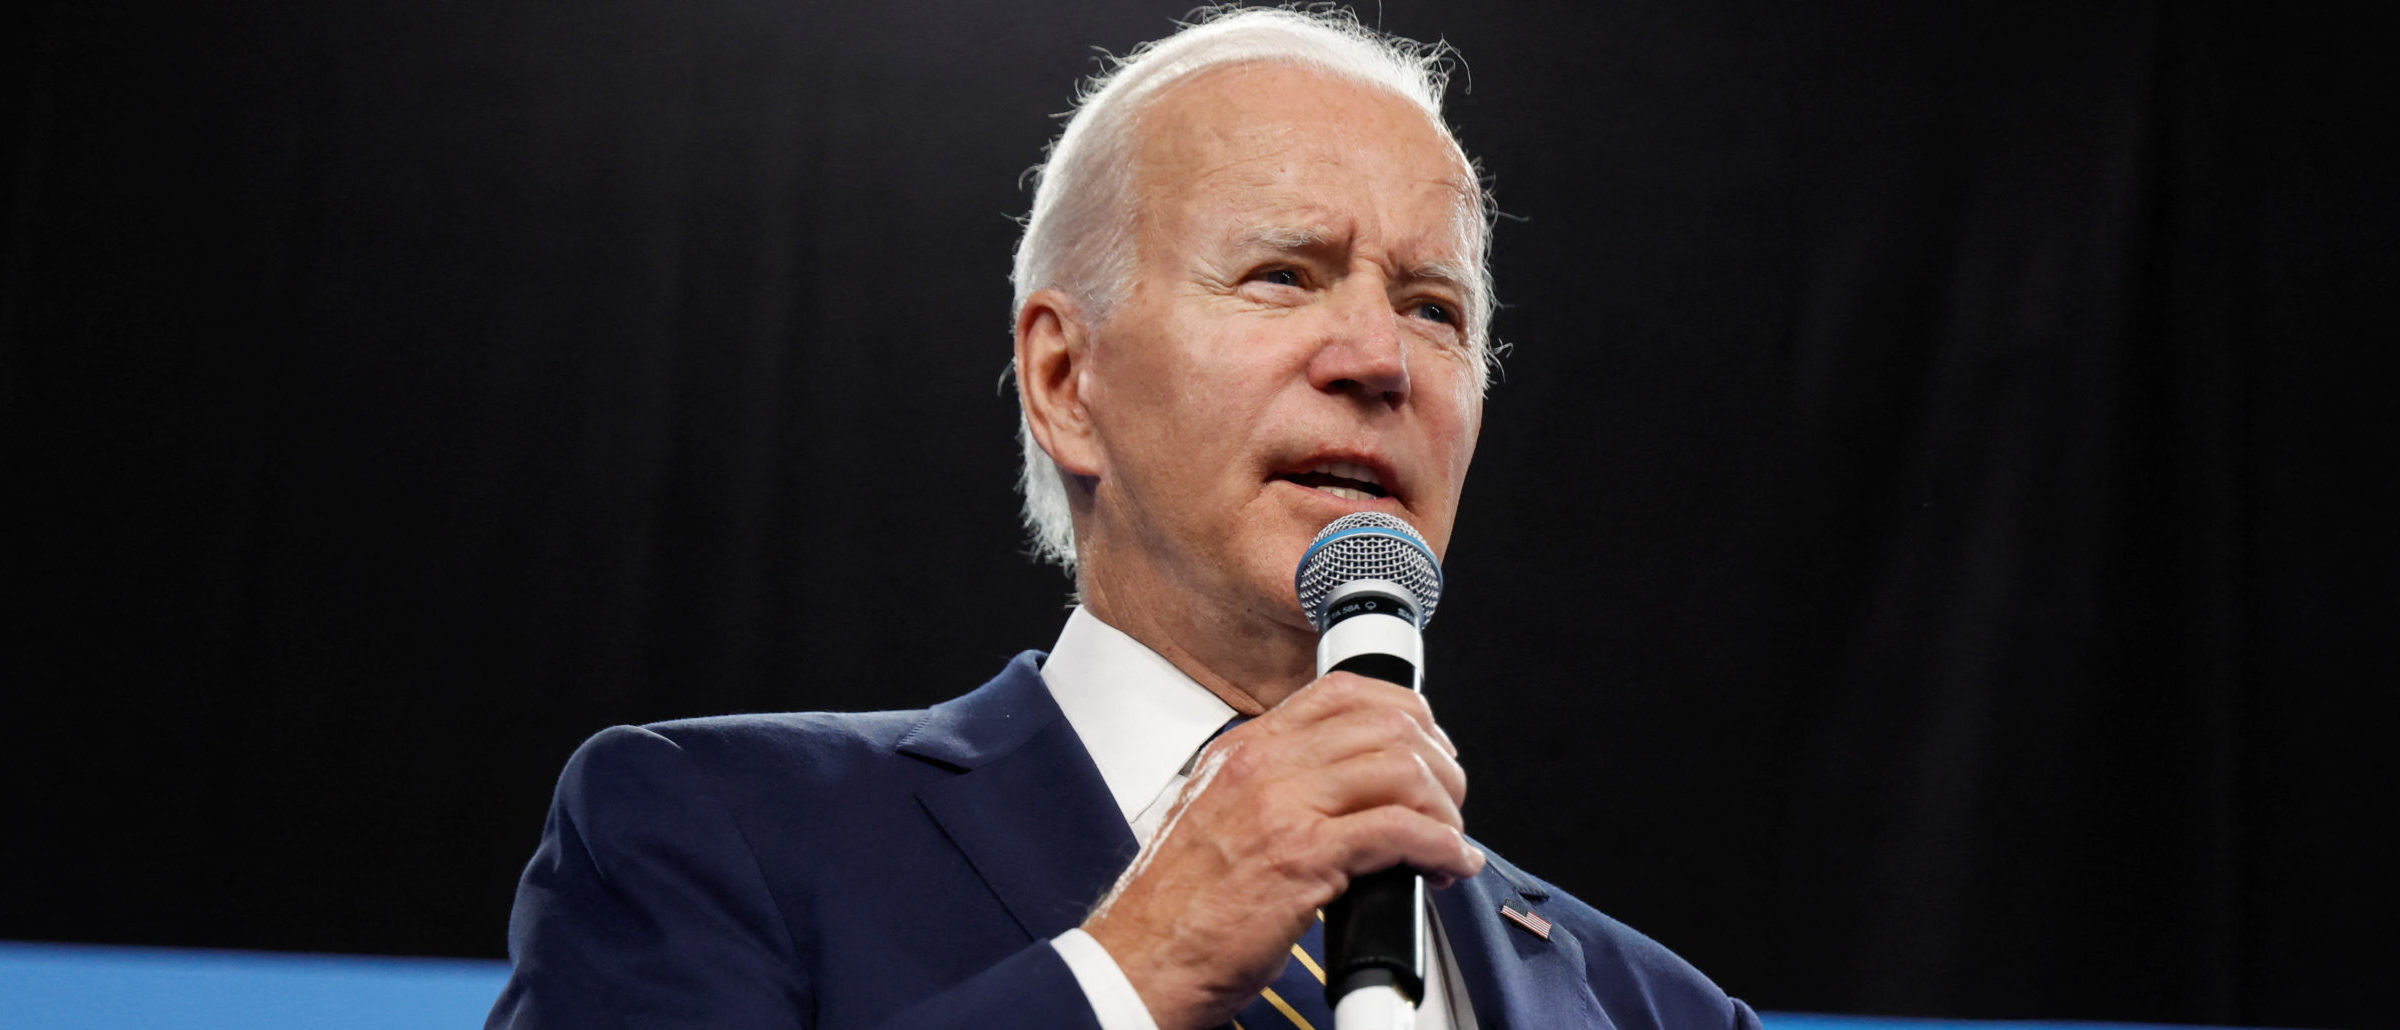 Biden Administration Seems Content With High Gas Prices As Americans’ Wallets Take A Hit